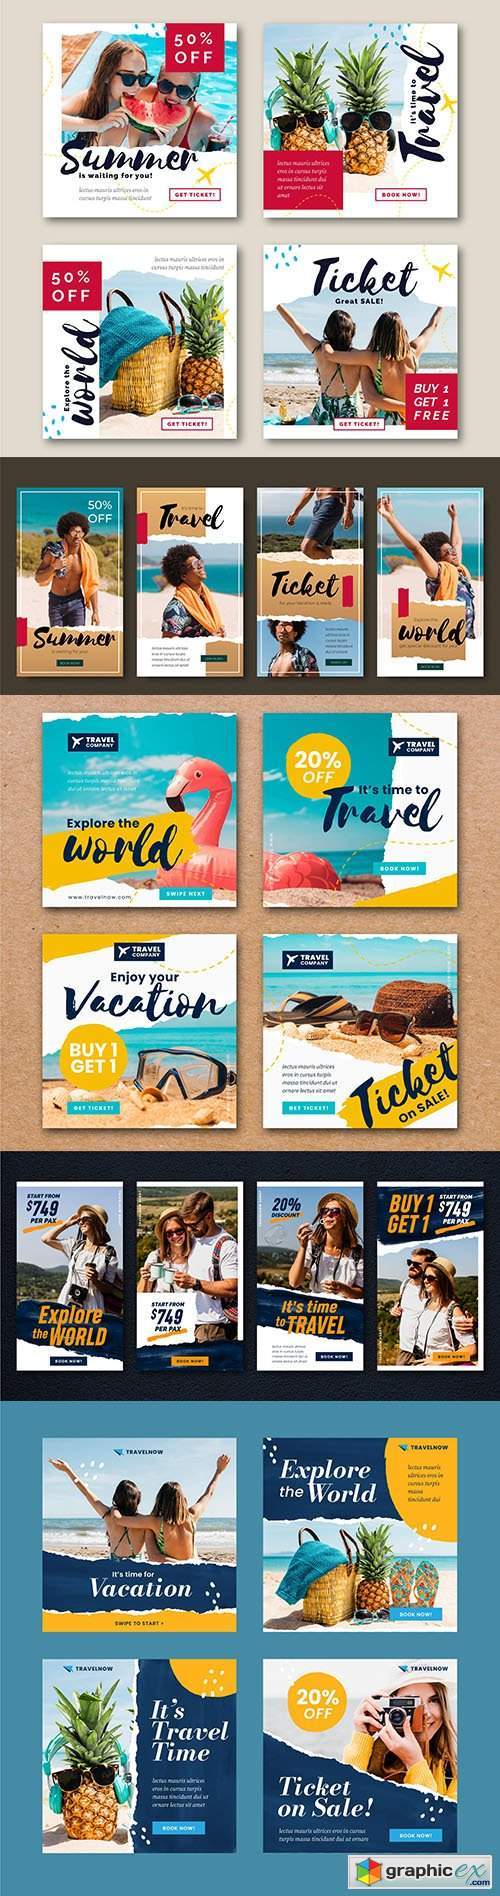 Travel story and travel sale instagram post template